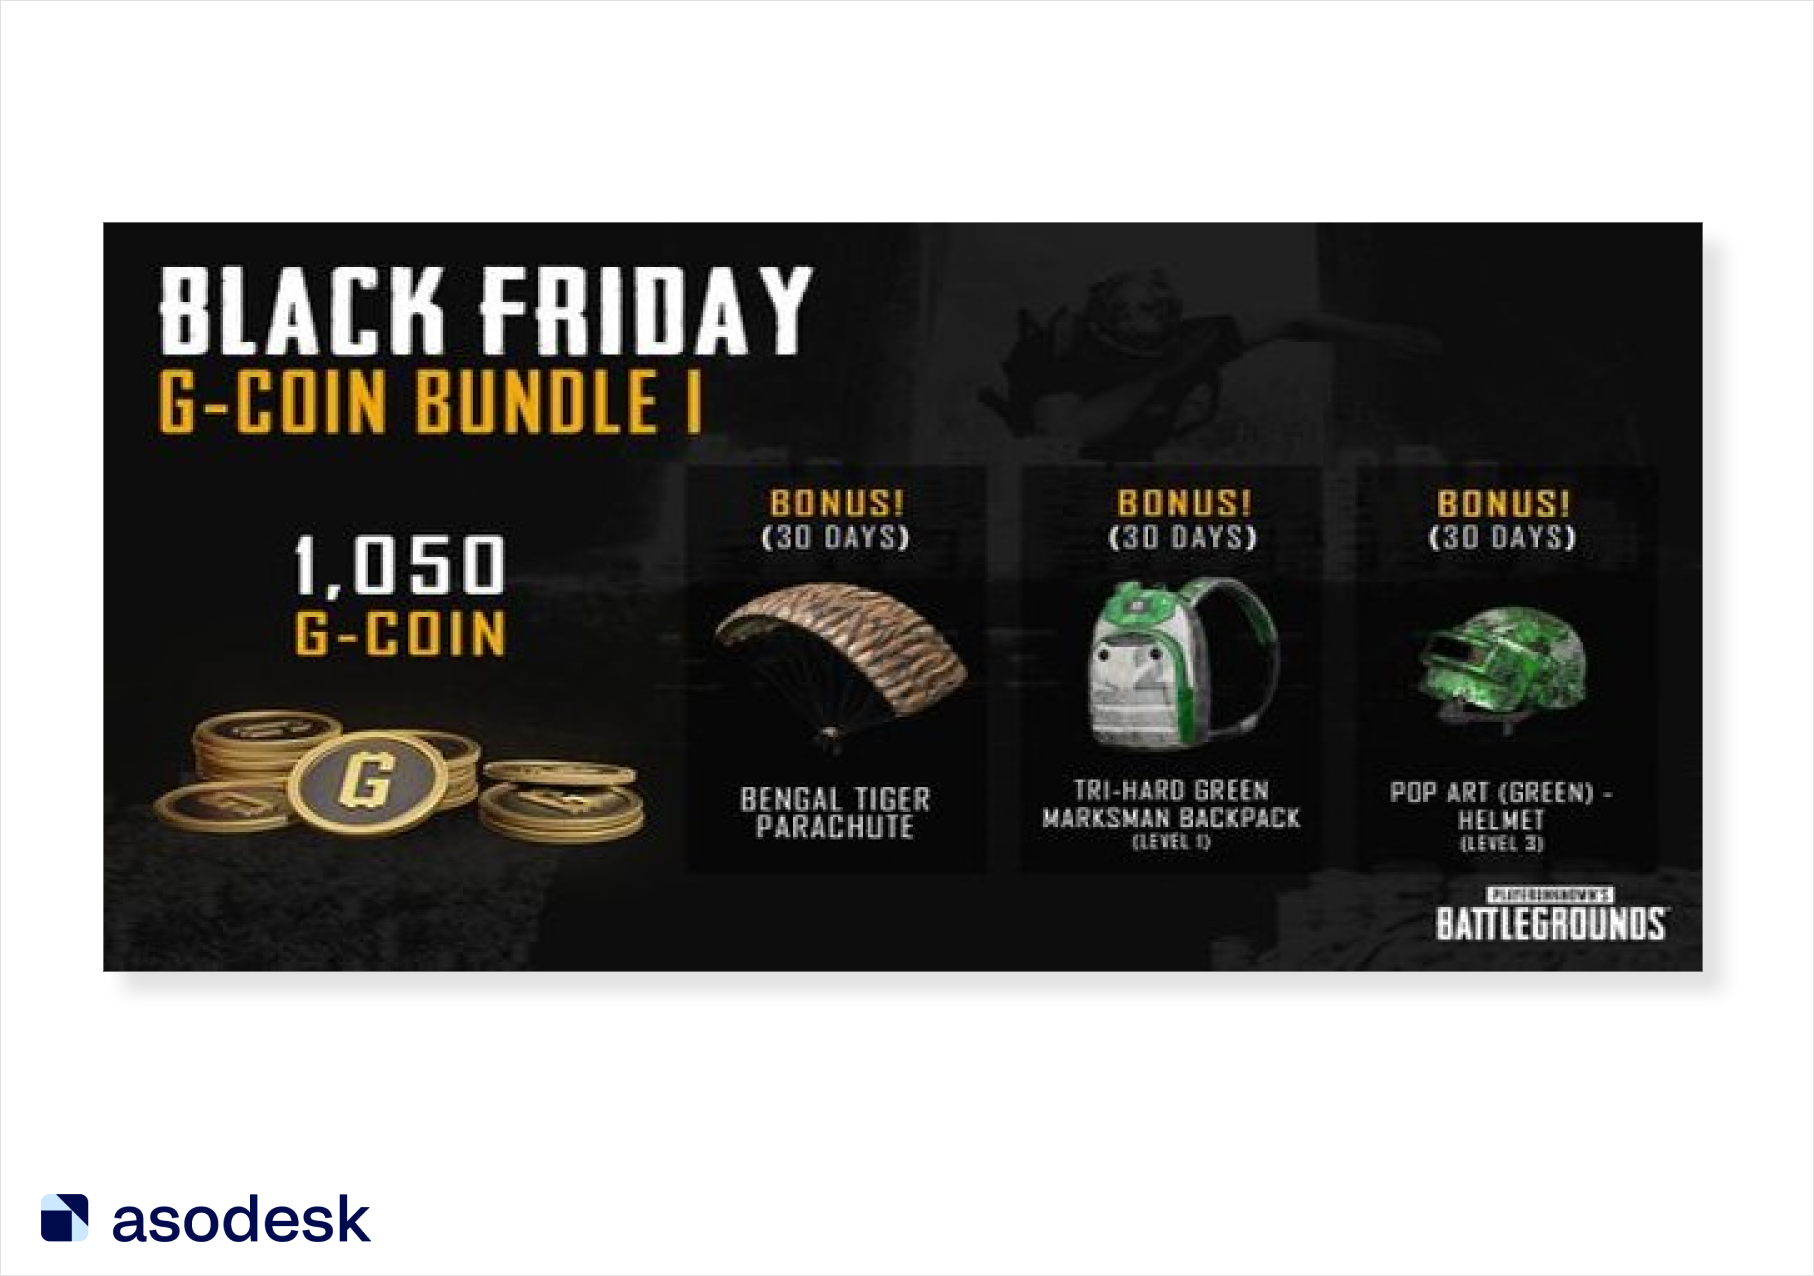 Black Friday G-Coins Bundle 1 from PUBG MOBILE